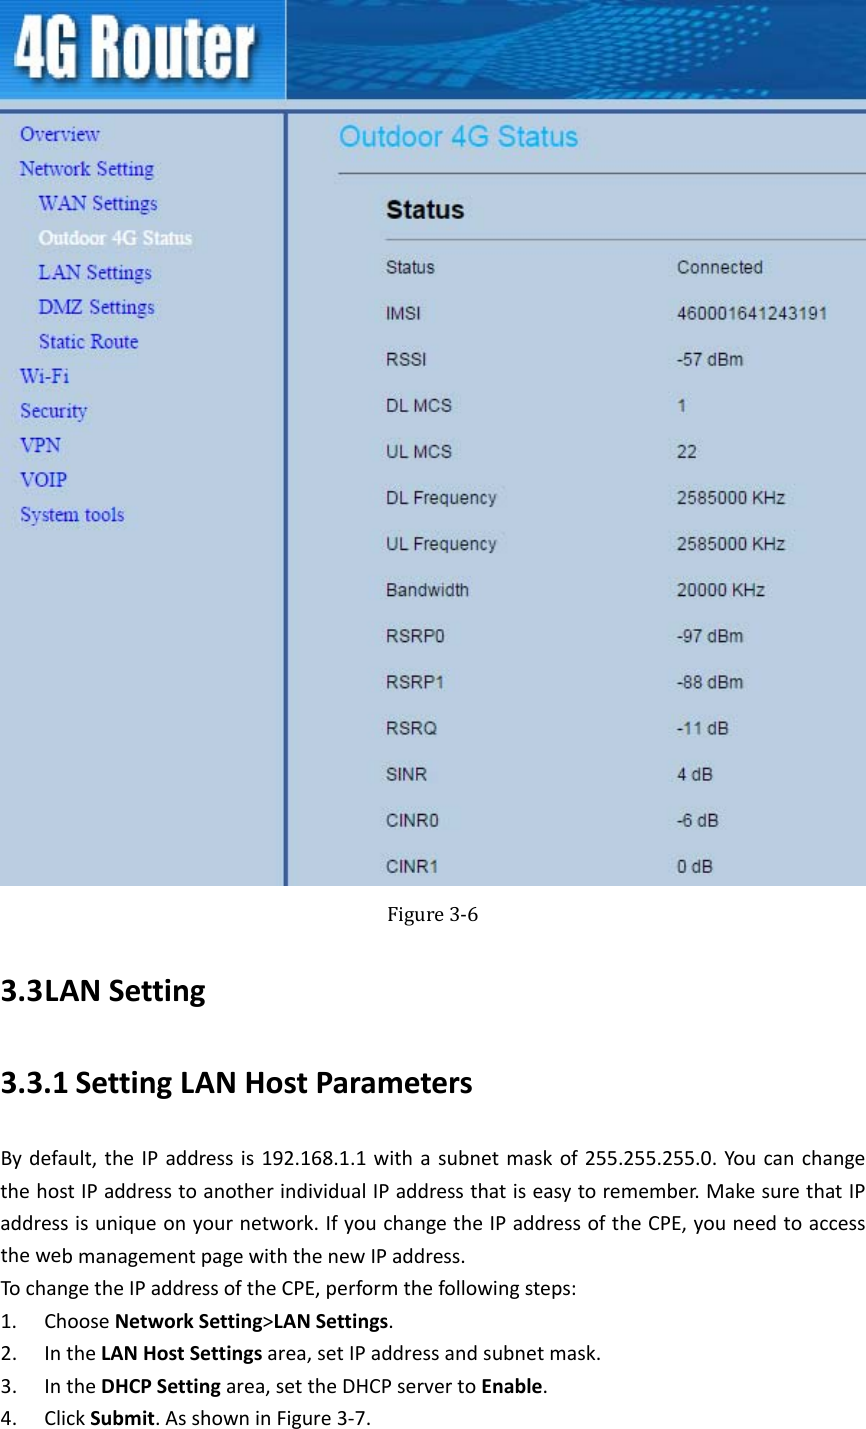    Figure3‐63.3 LANSetting3.3.1 SettingLANHostParametersBydefault,theIPaddressis192.168.1.1withasubnetmaskof255.255.255.0.YoucanchangethehostIPaddresstoanotherindividualIPaddressthatiseasytoremember.MakesurethatIPaddressisuniqueonyournetwork.IfyouchangetheIPaddressoftheCPE,youneedtoaccessthewebmanagementpagewiththenewIPaddress.TochangetheIPaddressoftheCPE,performthefollowingsteps:1. ChooseNetworkSetting&gt;LANSettings.2. IntheLANHostSettingsarea,setIPaddressandsubnetmask.3. IntheDHCPSettingarea,settheDHCPservertoEnable.4. ClickSubmit.AsshowninFigure3‐7.